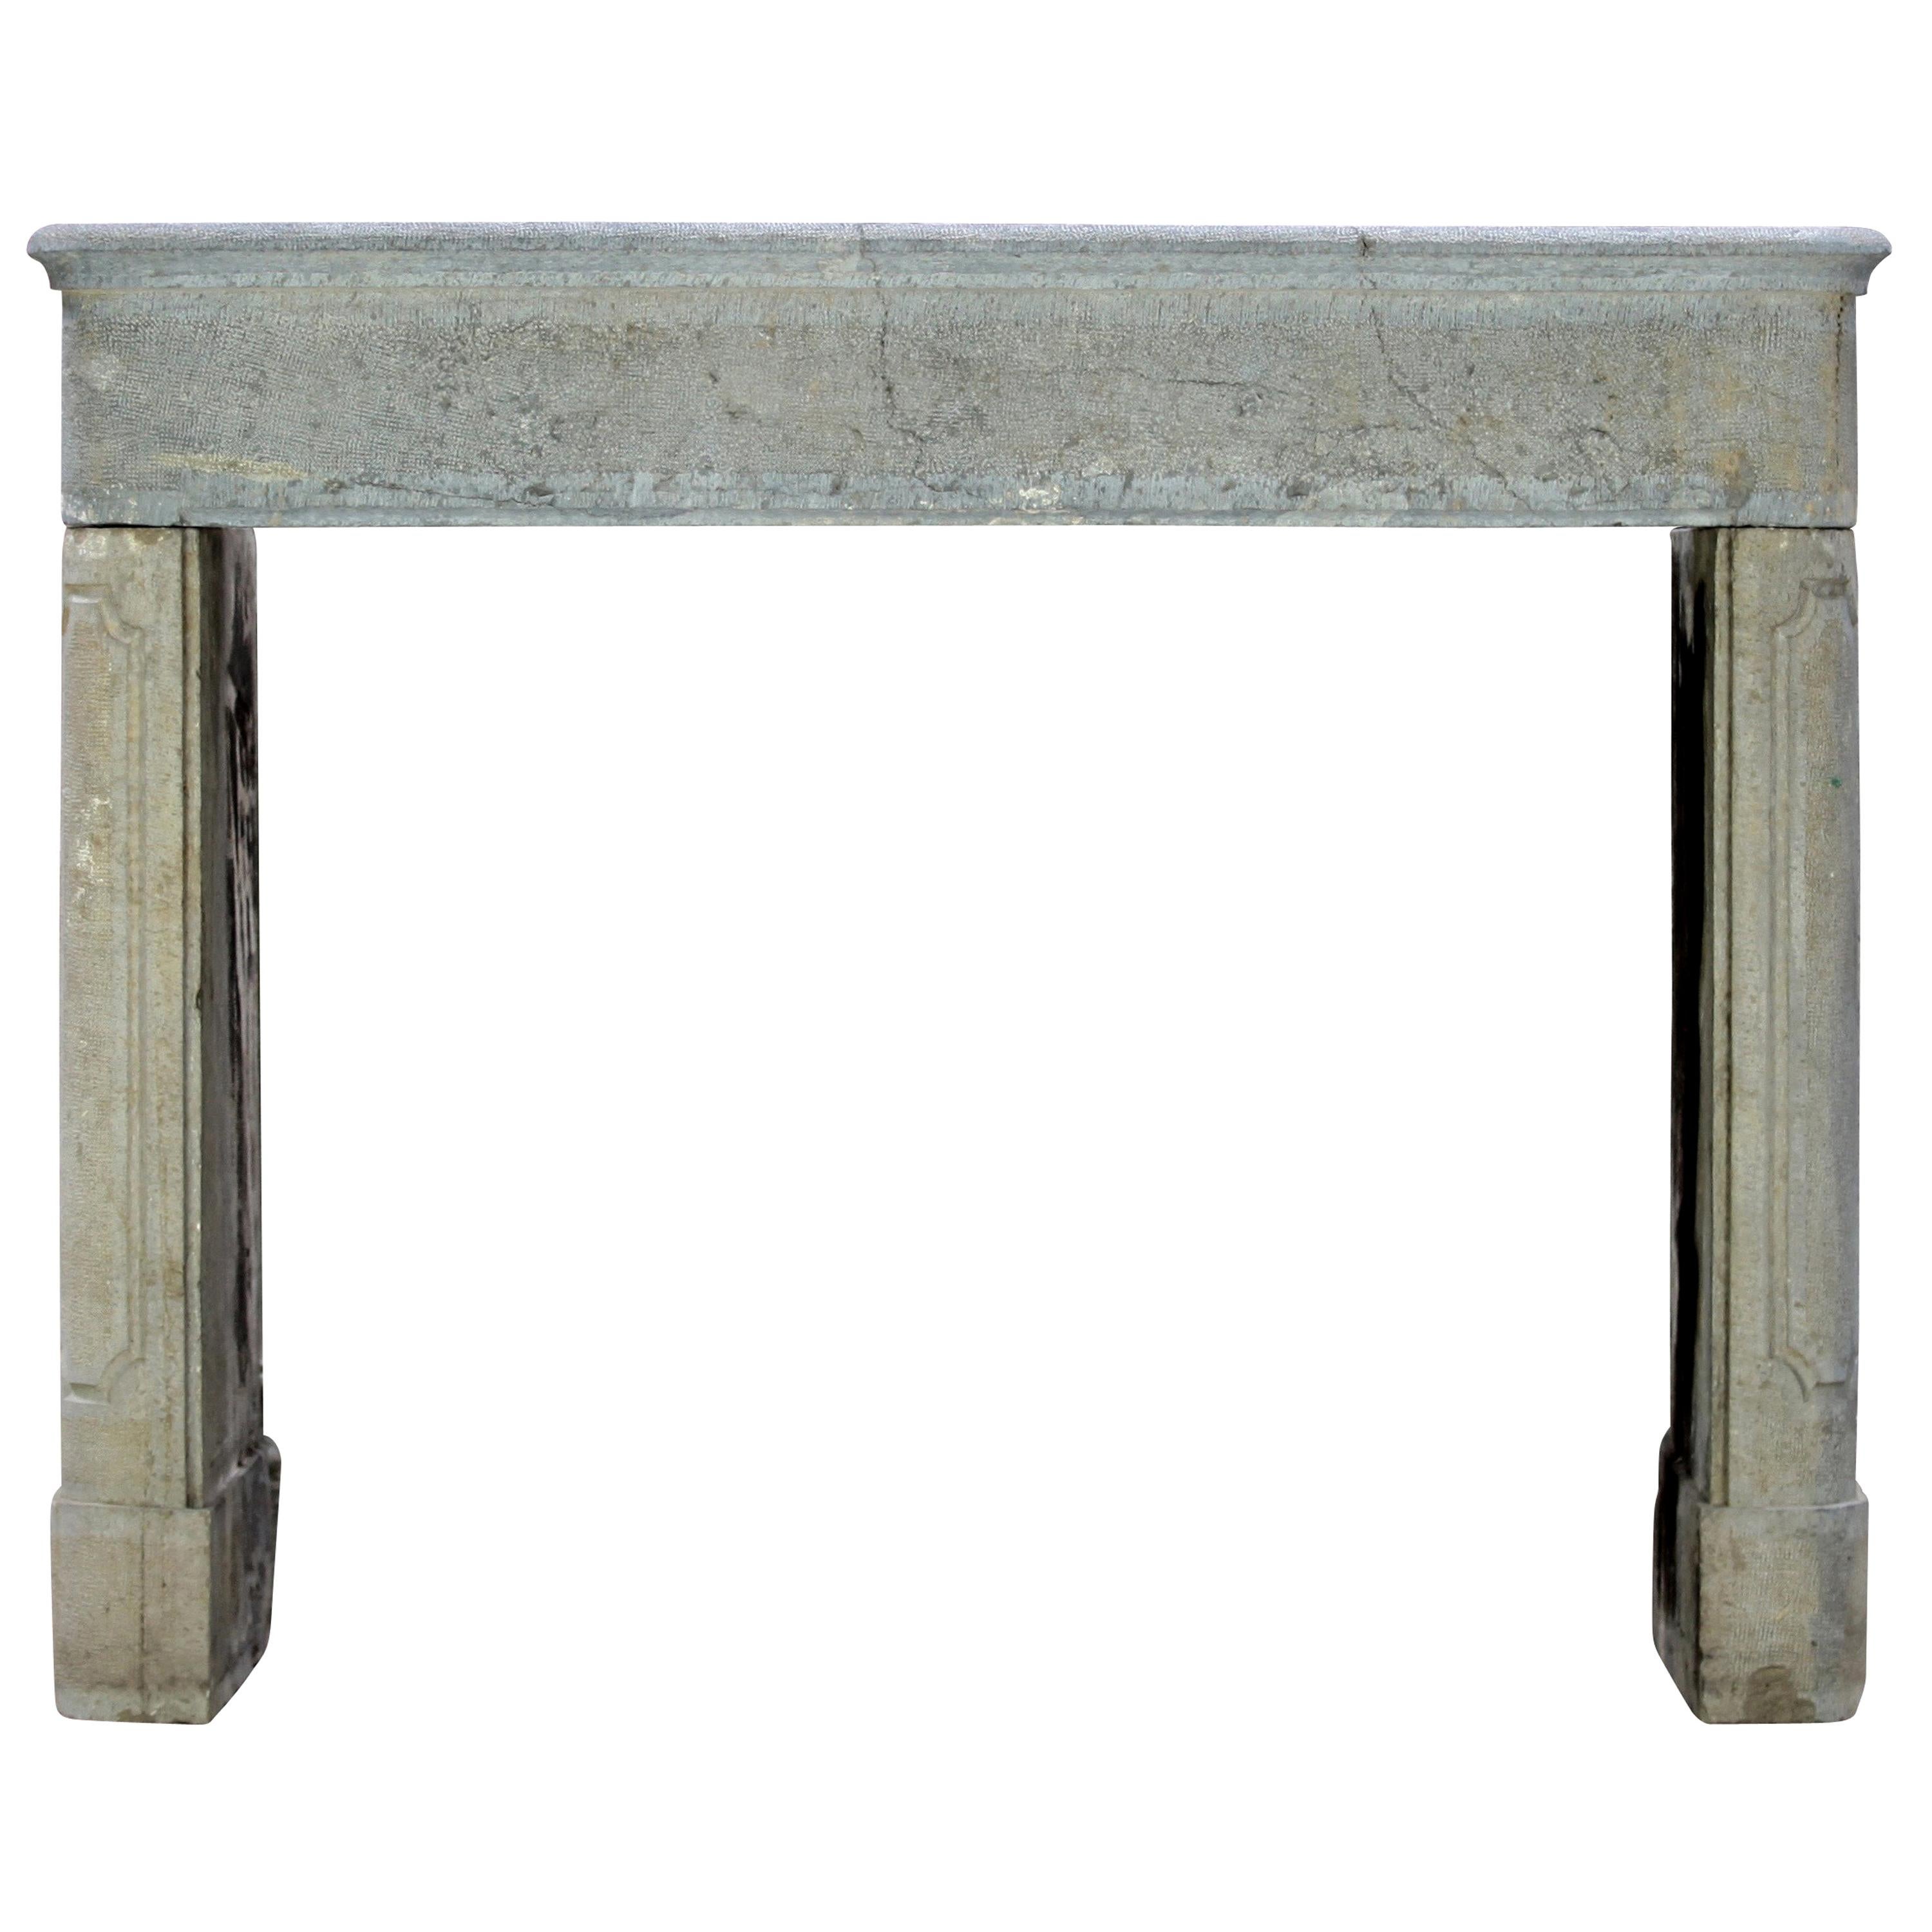 17th Century French Country Rustic Bicolor Stone Antique Fireplace Surround